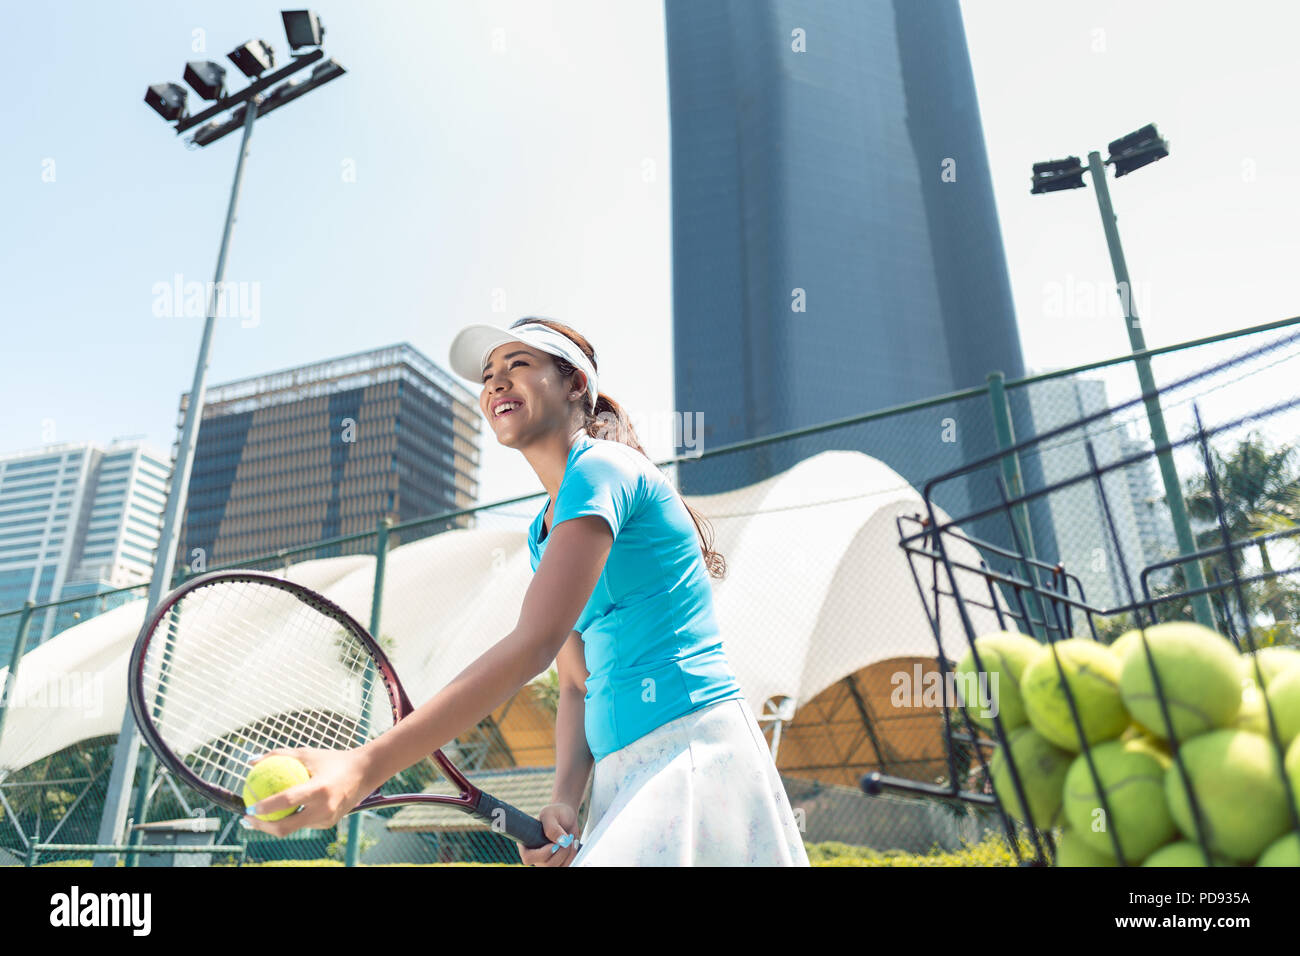 Cheerful beautiful woman playing tennis in a developed city Stock Photo